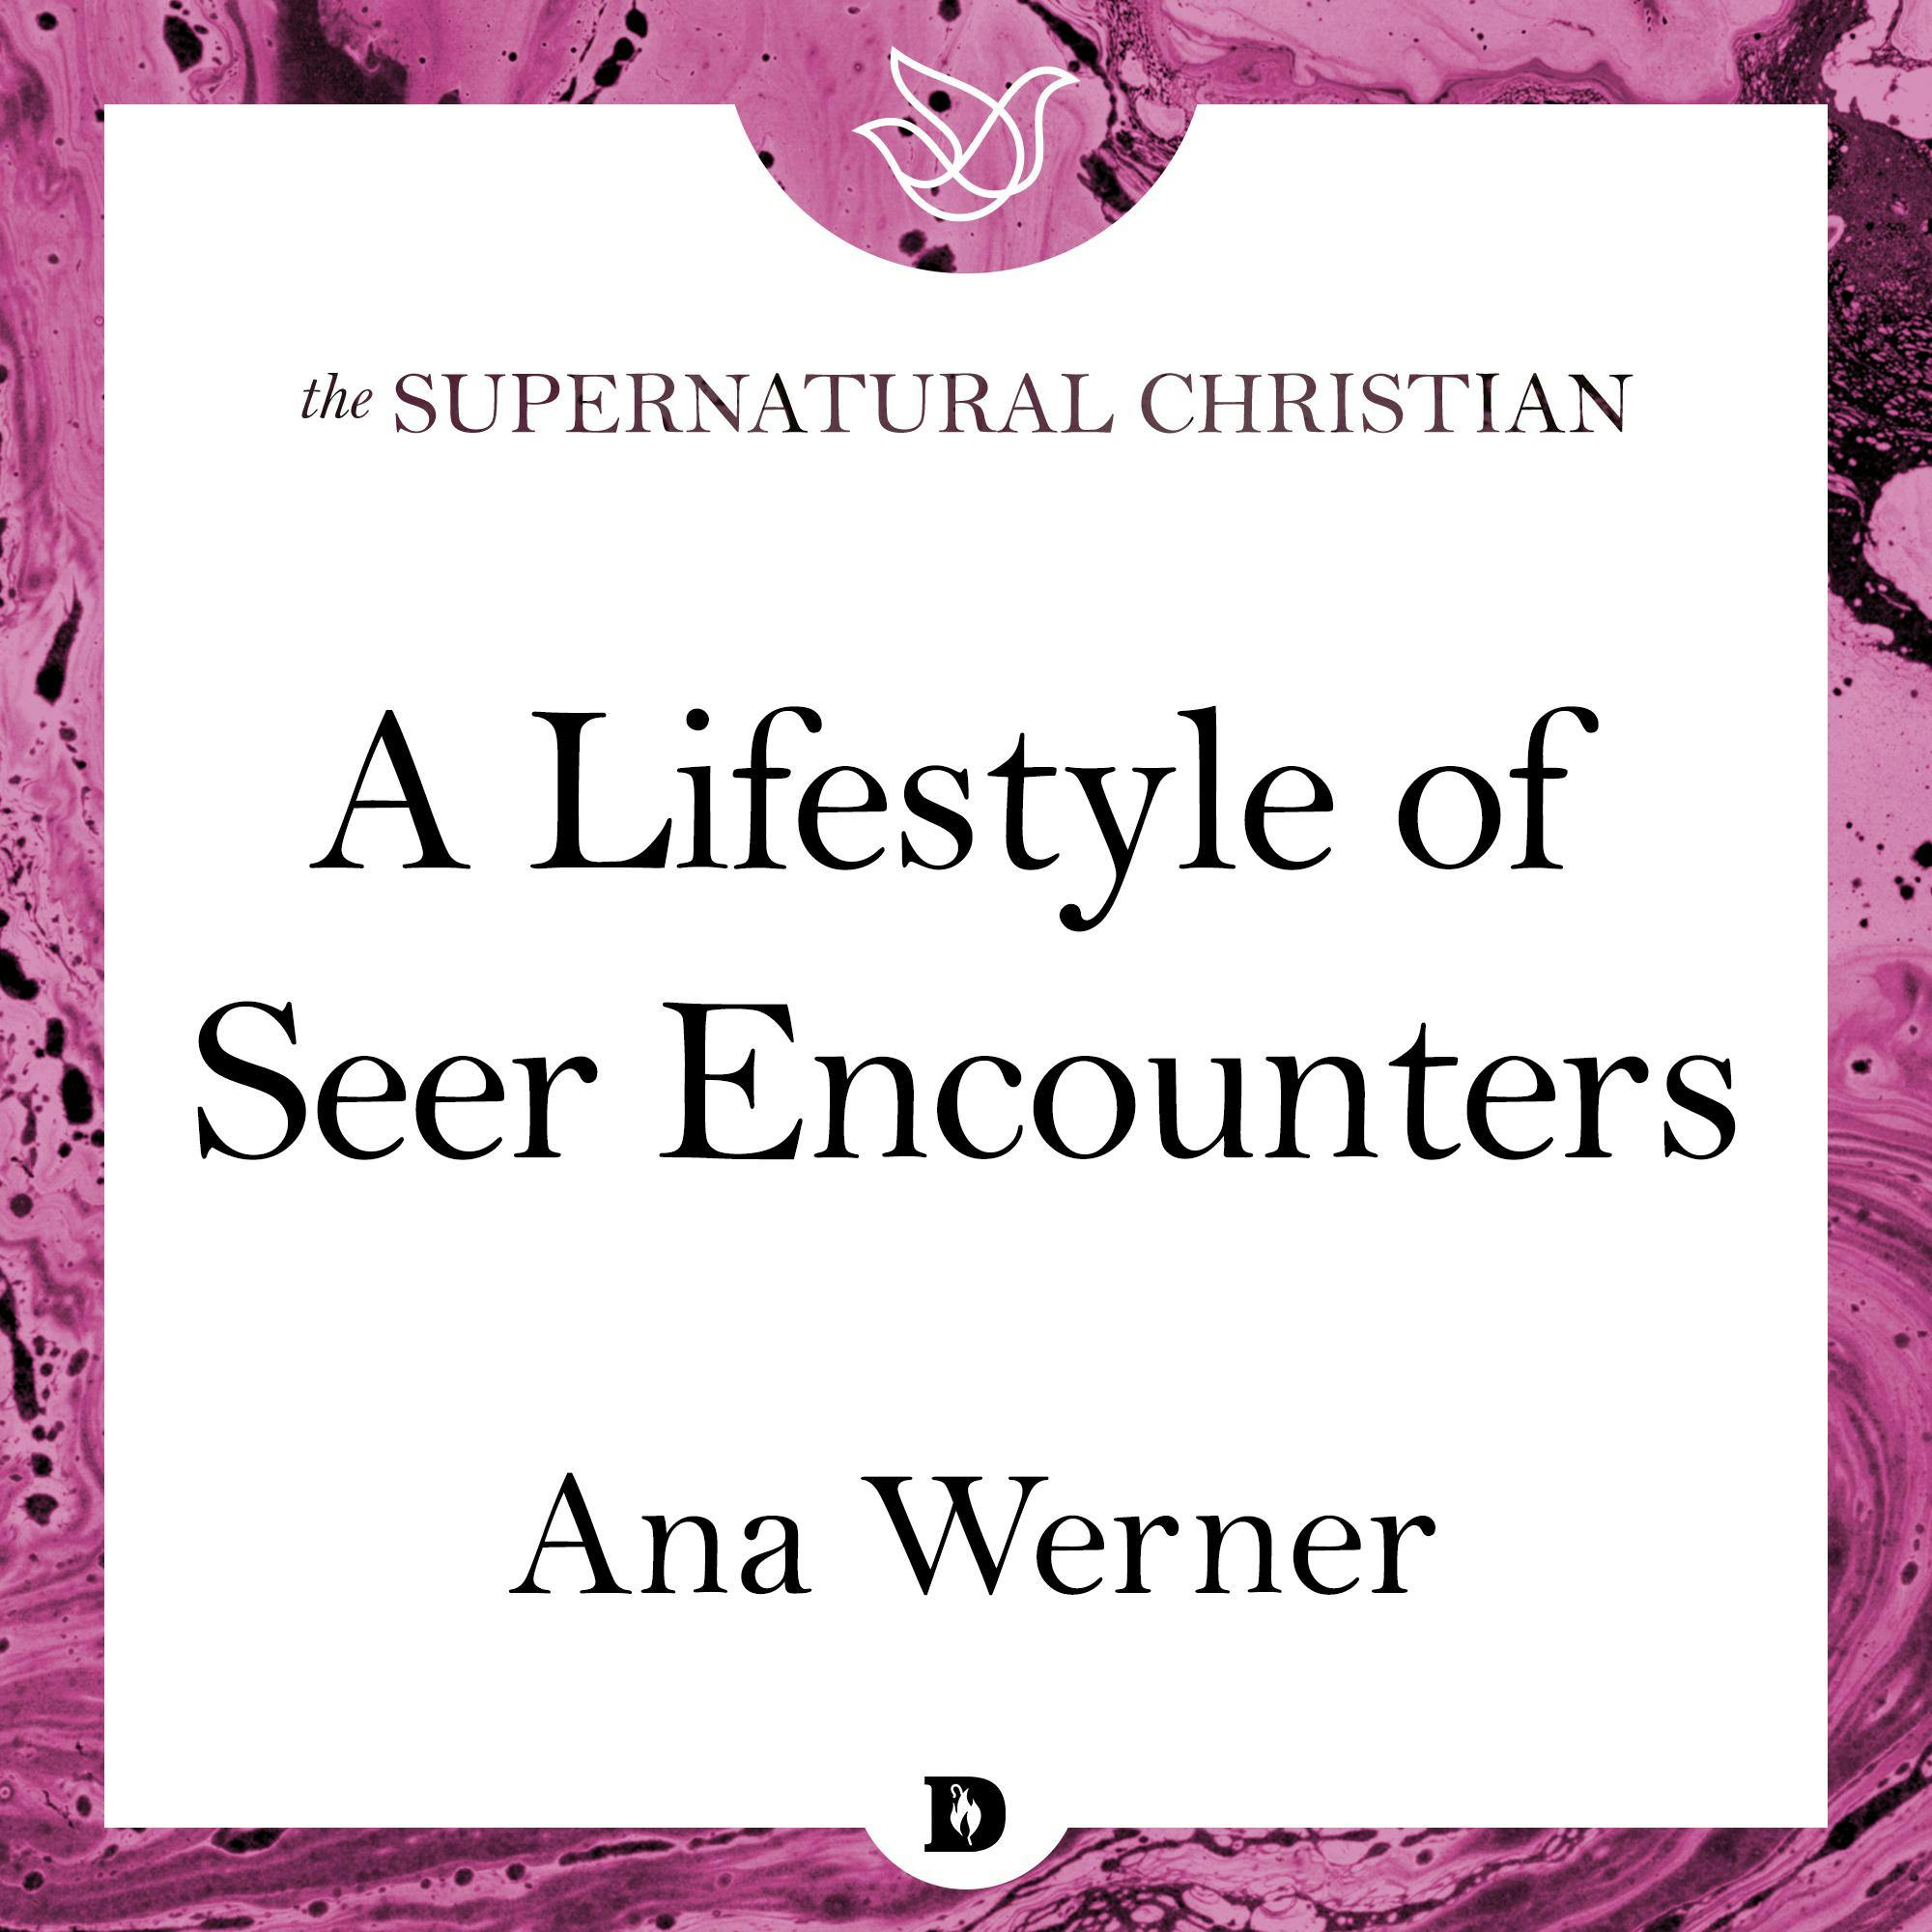 A Lifestyle of Seer Encounters: A Feature Teaching From Seeing Behind the Veil - Ana Werner